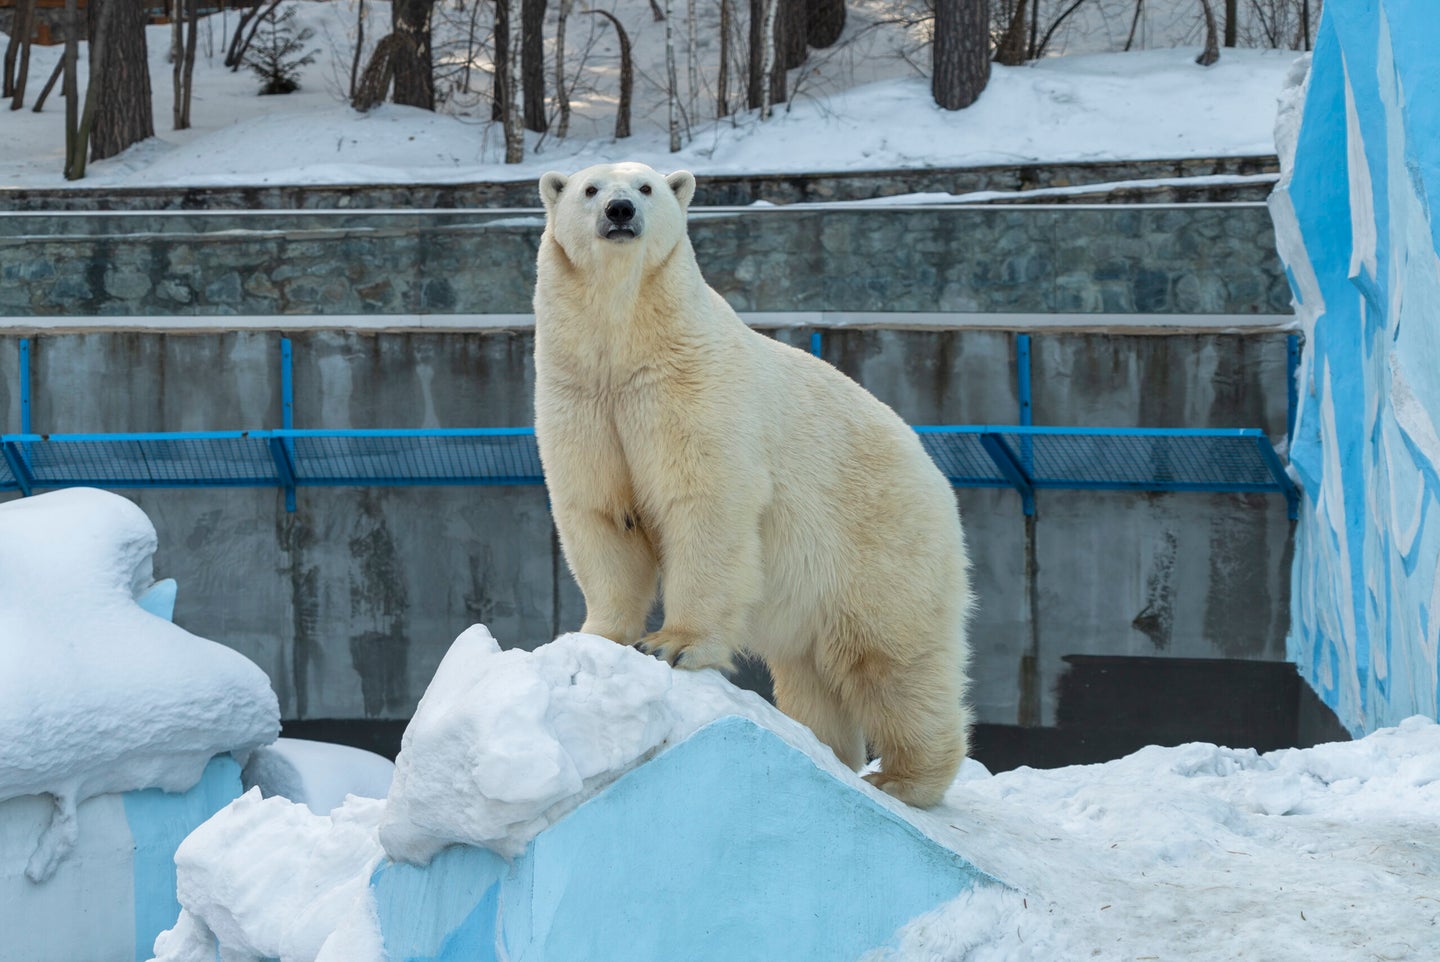 A white polar bear standing on snow in a zoo with blue bars in the background.